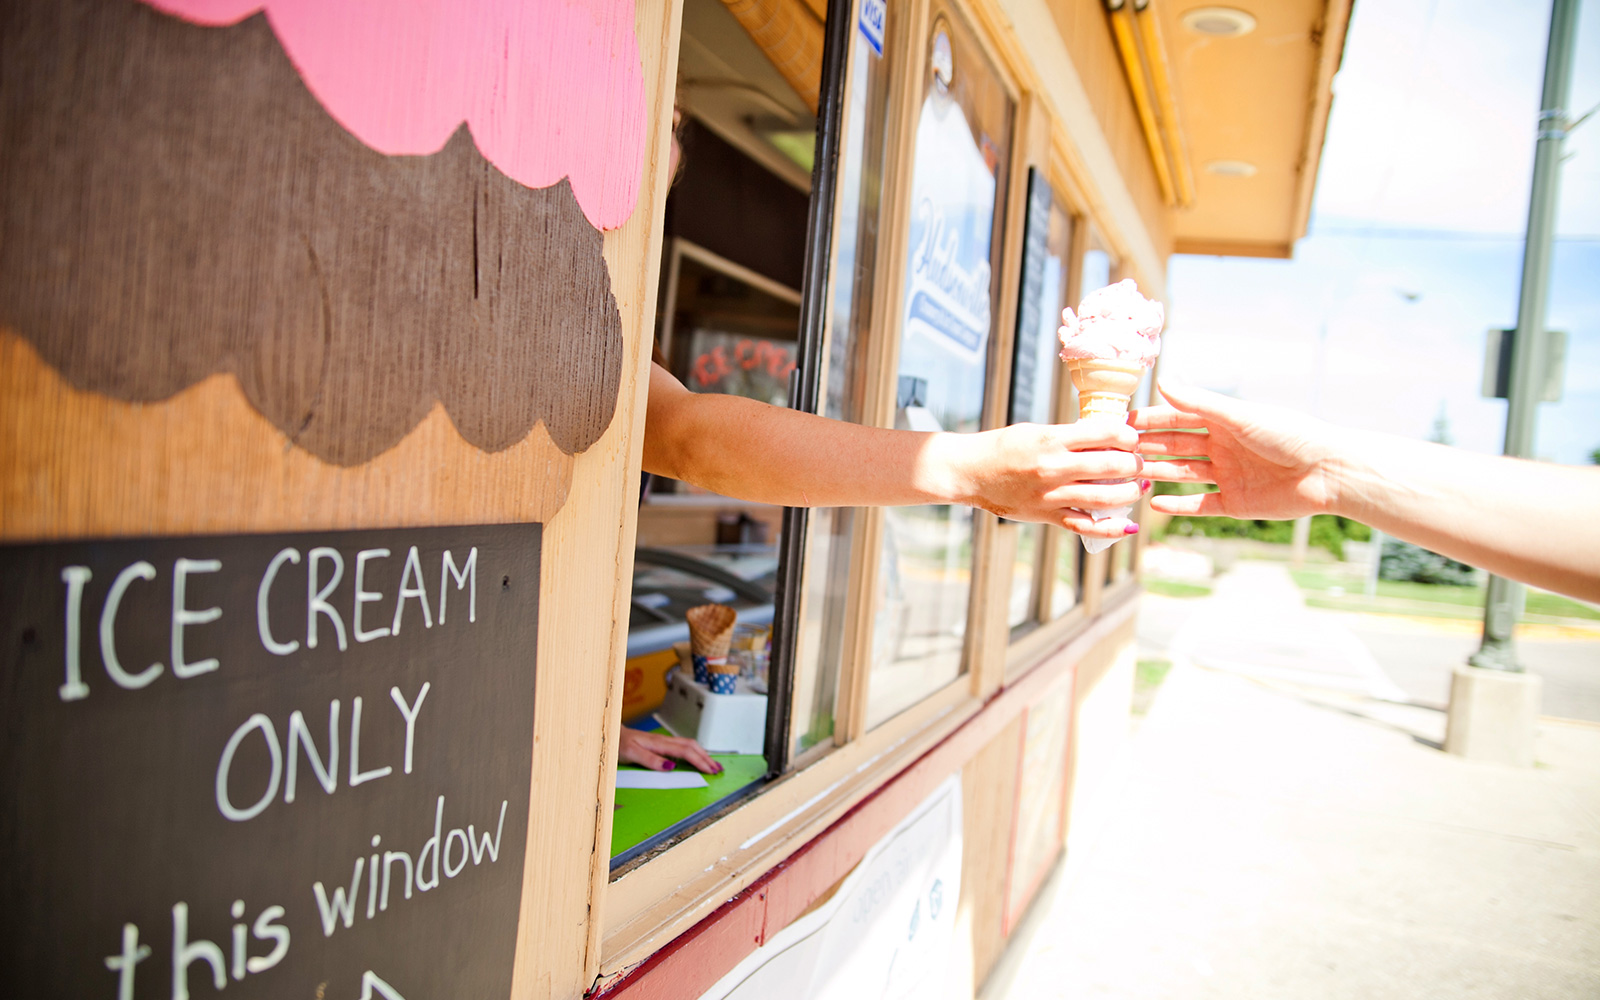 ice cream is handed out through a window to a customer